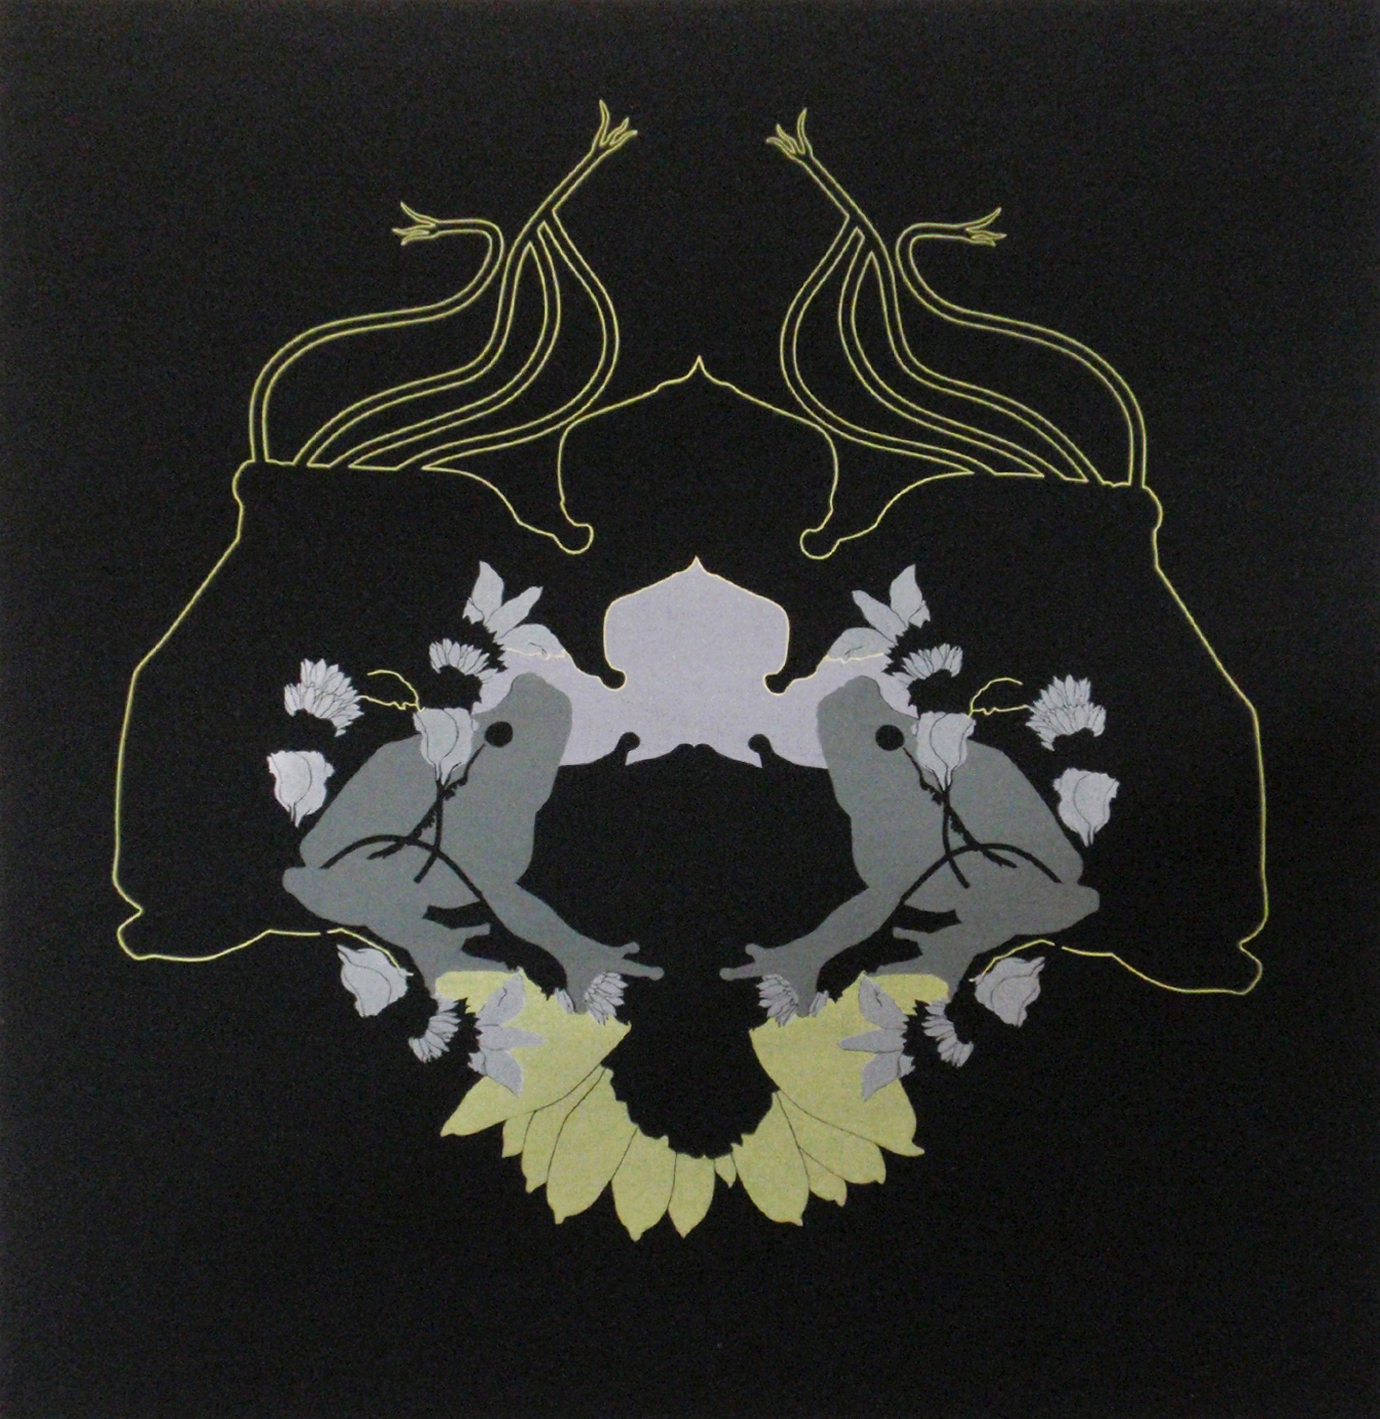  'Frogs' (2008) Silk screen print: pigment on cotton, stretched on wooden frame, 100cm x 100cm. 